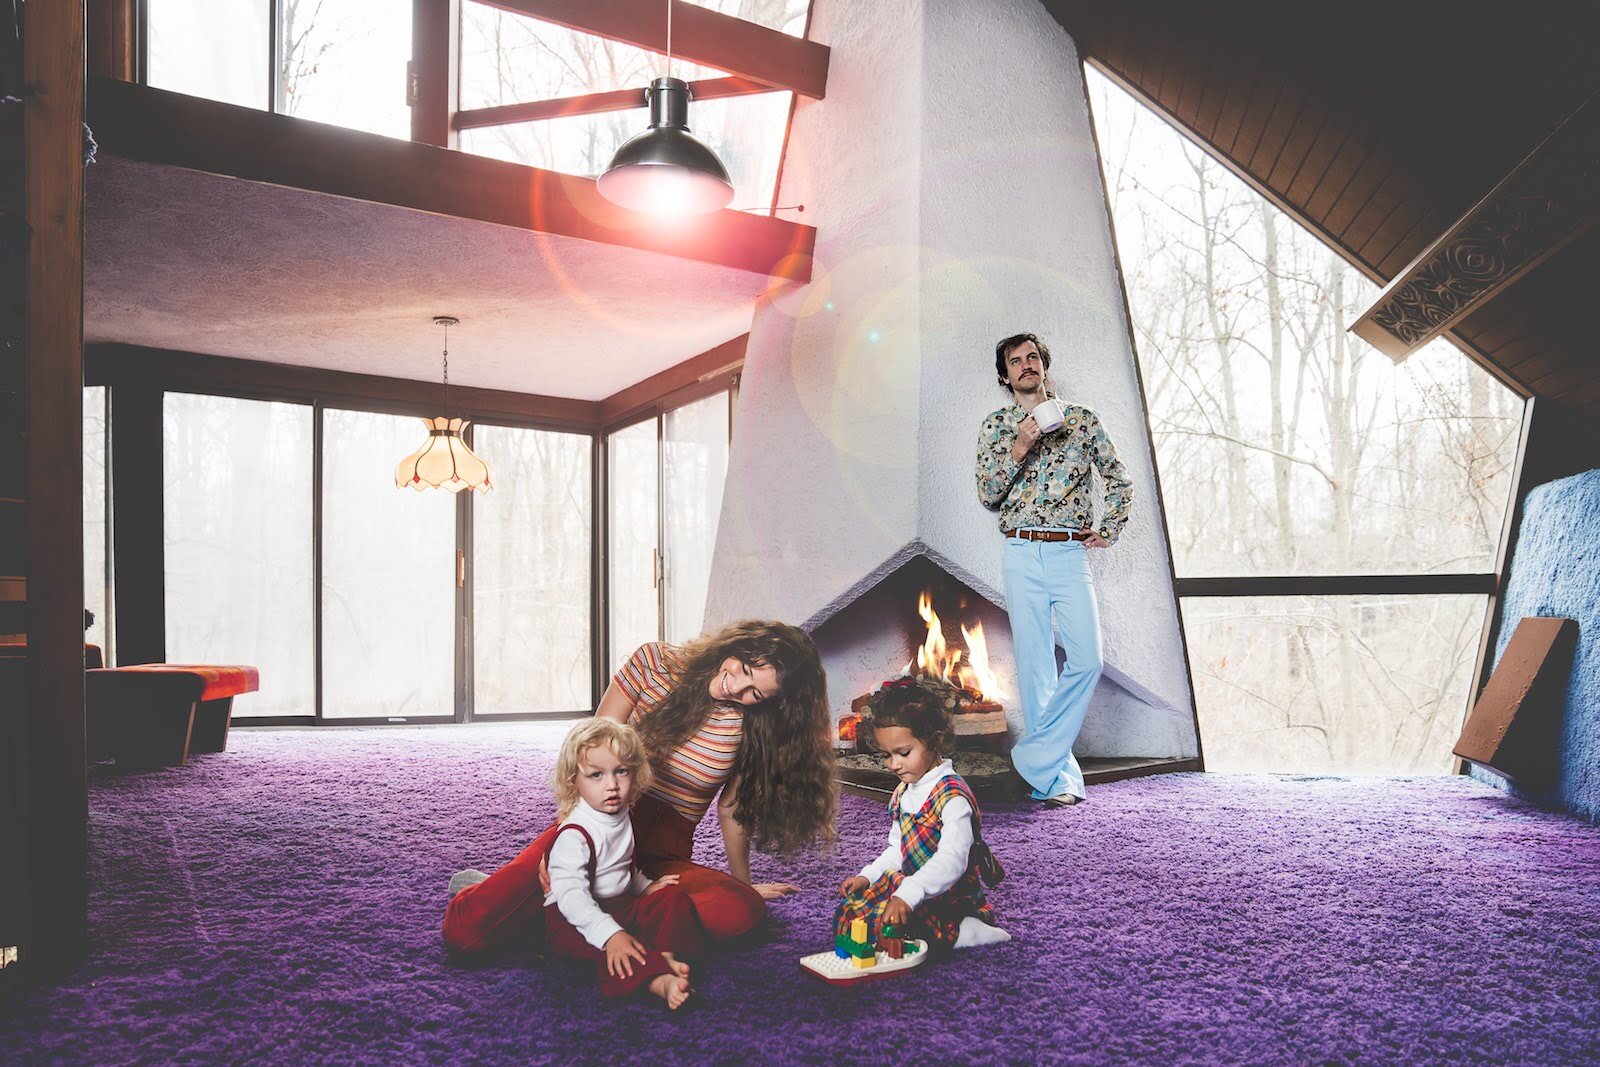 The Jackson family did a fun 70s-themed photoshoot with Fort Wayne photographer Dustin McKibben as a tribute to the home's retro design.